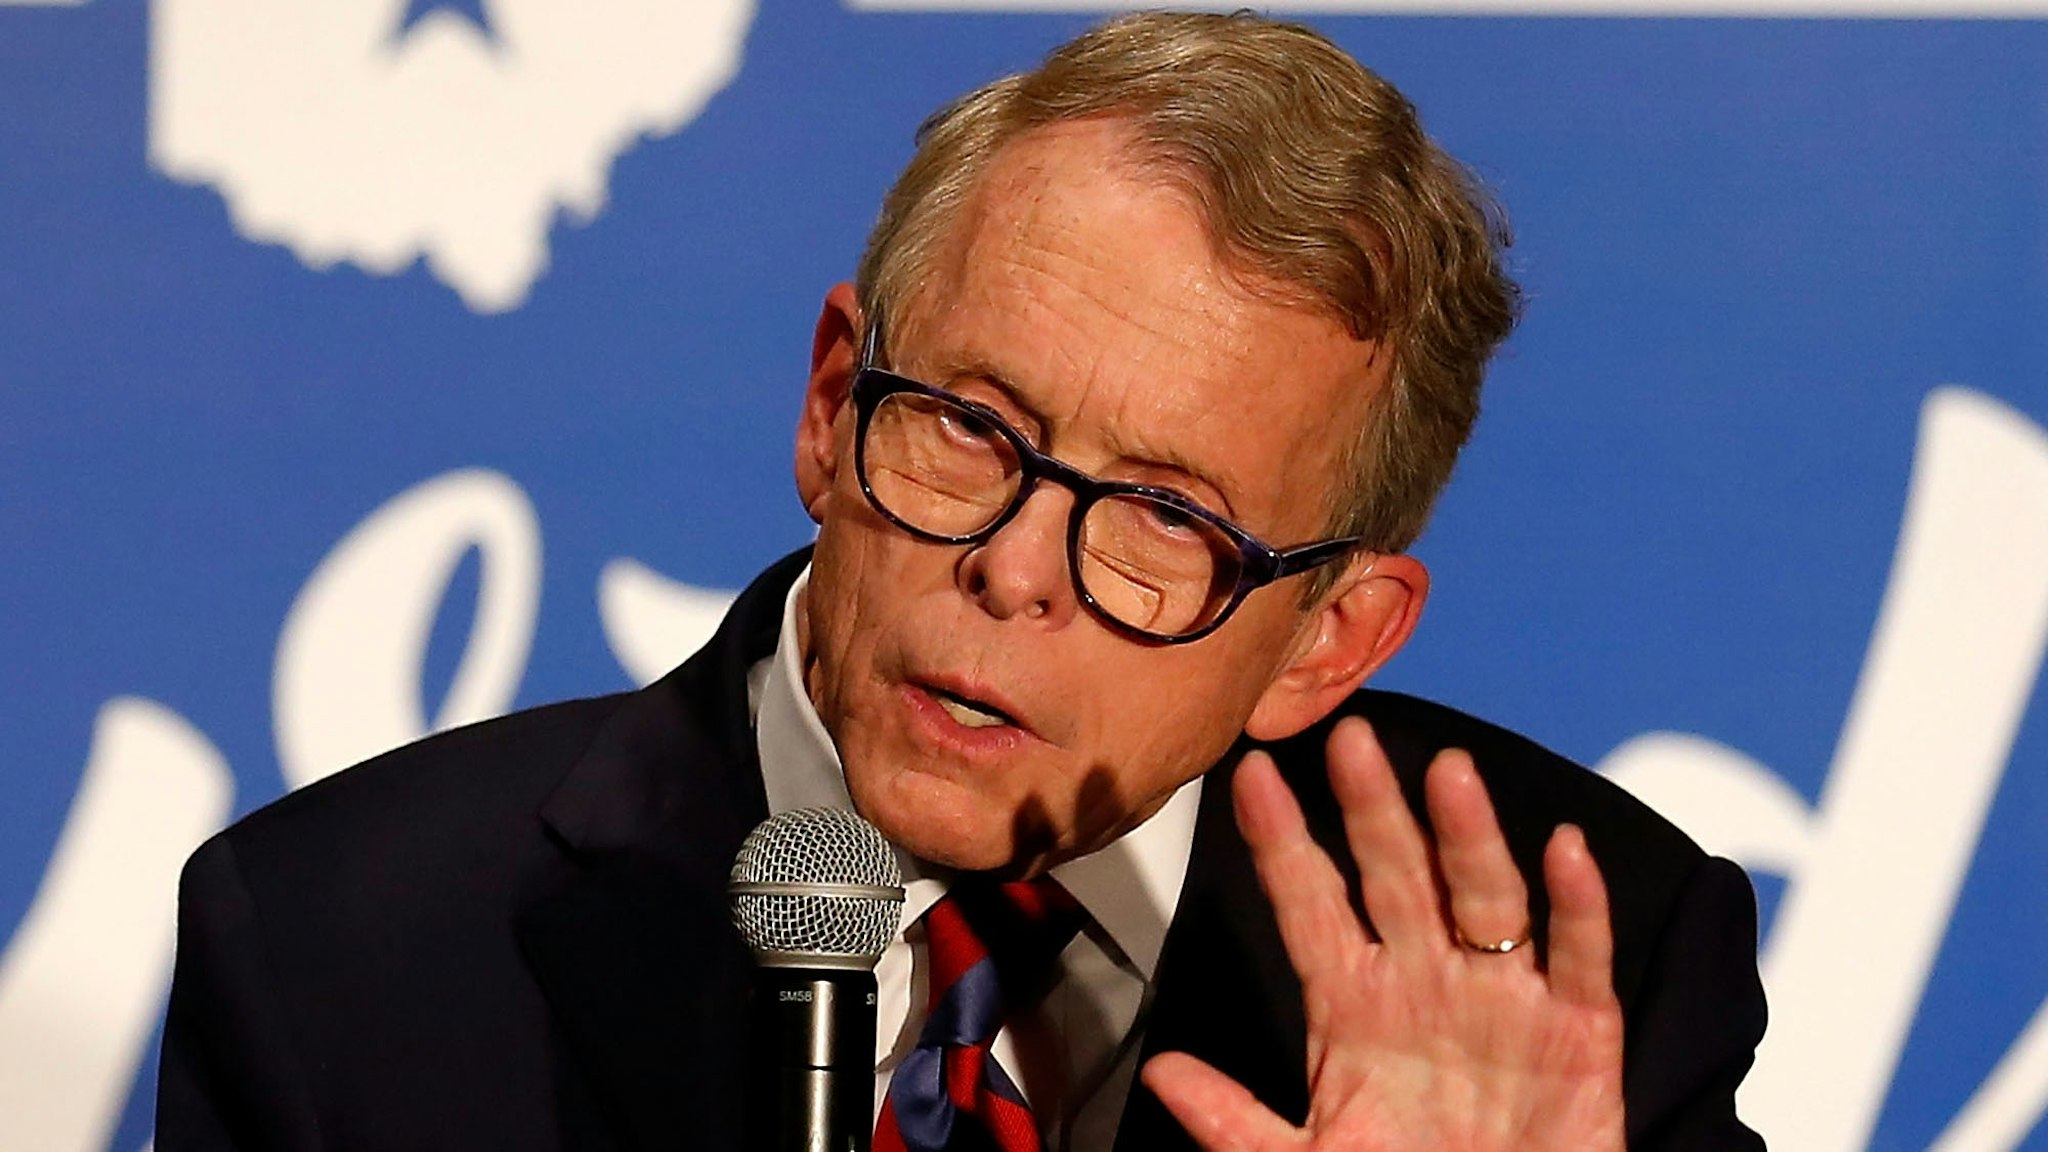 COLUMBUS, OH - NOVEMBER 02: Republican Gubernatorial Candidate Ohio Attorney General Mike DeWine lists some of his political accomplishments and explains to supporters why he is the best choice for governor during a campaign event at the Boat House at Confluence Park on November 2, 2018 in Columbus, Ohio. DeWine is running against former Ohio Attorney General and Democratic Gubernatorial Candidate Richard Cordray for the governorship of Ohio, currently held by Republican and 2016 Presidential candidate John Kasich, who has reached his term limit.